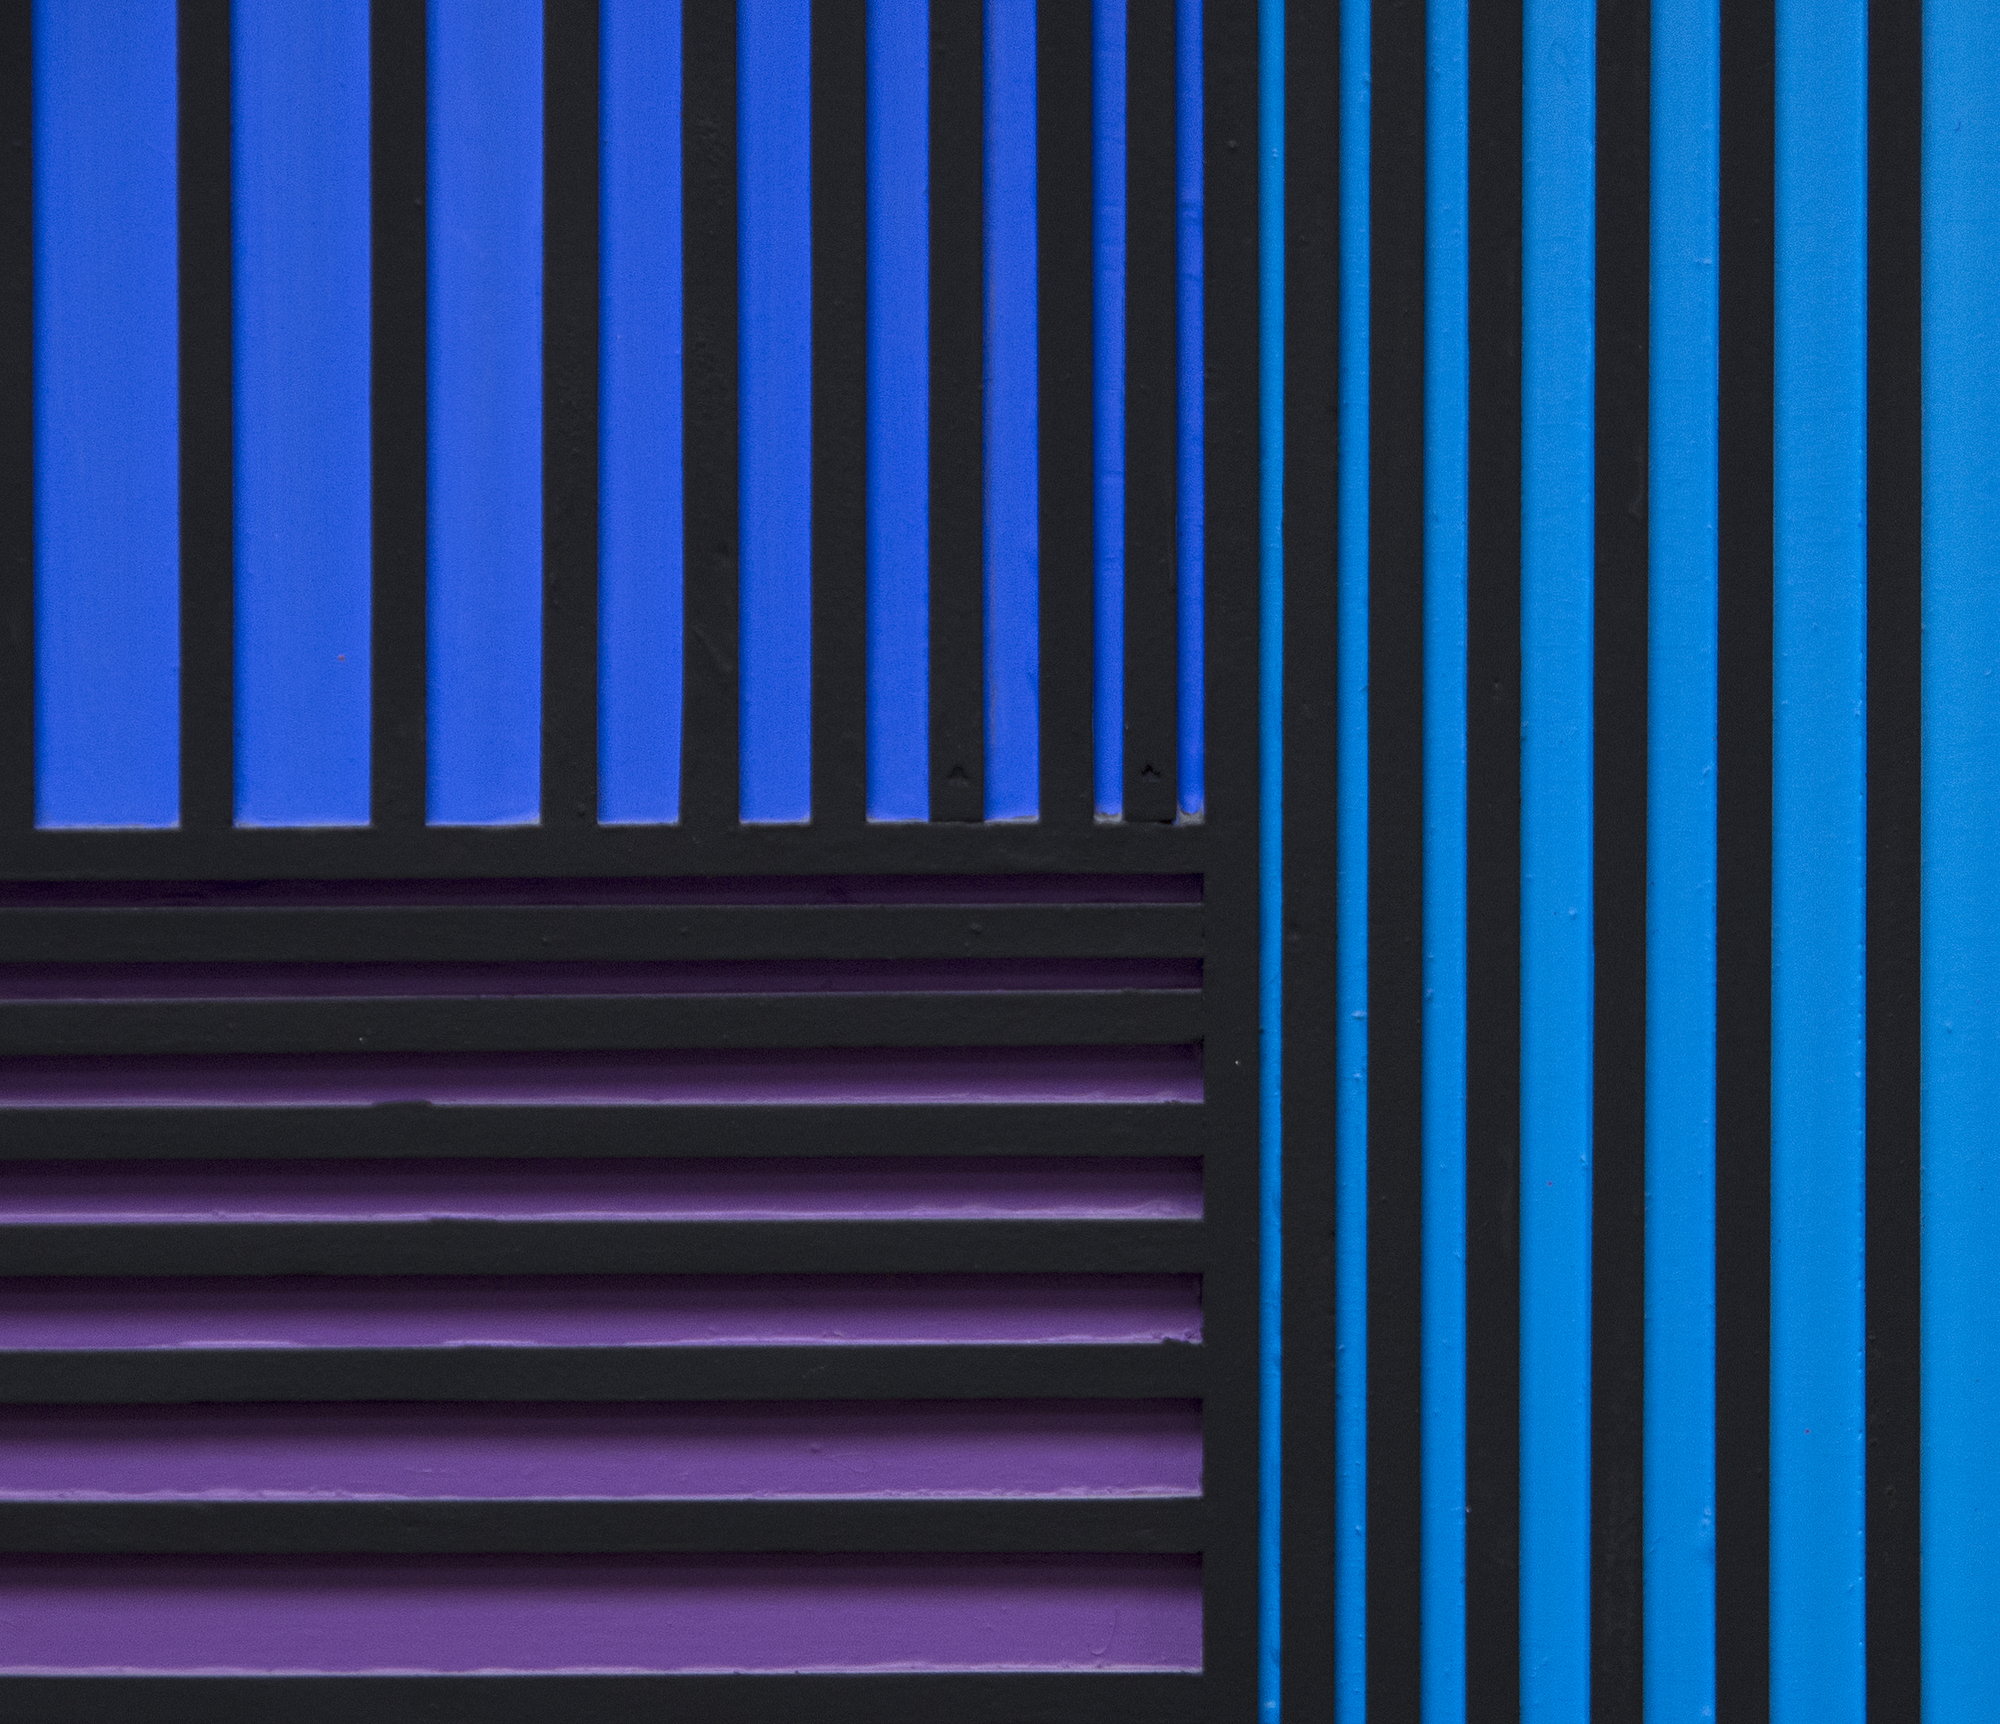 Op Art evolved as an alternative trend in painting to the abstract expressionist movement of the 1950s. The genesis of the movement was in the 1960s, when artists such as Victor Vasarely, Bridget Riley, and Richard Anuszkiewicz embraced a more structured and geometric approach to their painting, often using visual tricks to create a sense of movement.  While the artistic and spiritual predecessors to OP Art, such as Josef Albers (!888-1976), utilized a softer and more subdued approach, the Op Artists were using bold, large-scale works with variable dimensions to create their visual statement.  
<br>
<br>A student of Albers, Richard Anuszkiewicz, used enamel and acrylic paint on wood in such a way to create his uncompromising and exact compositions.  A great sense of action can be felt in the present work, "Translumina". The sister piece to "Translumina," "Translumina II" (1986), is in the permanent collection of the Albright-Knox Art Gallery, Buffalo.